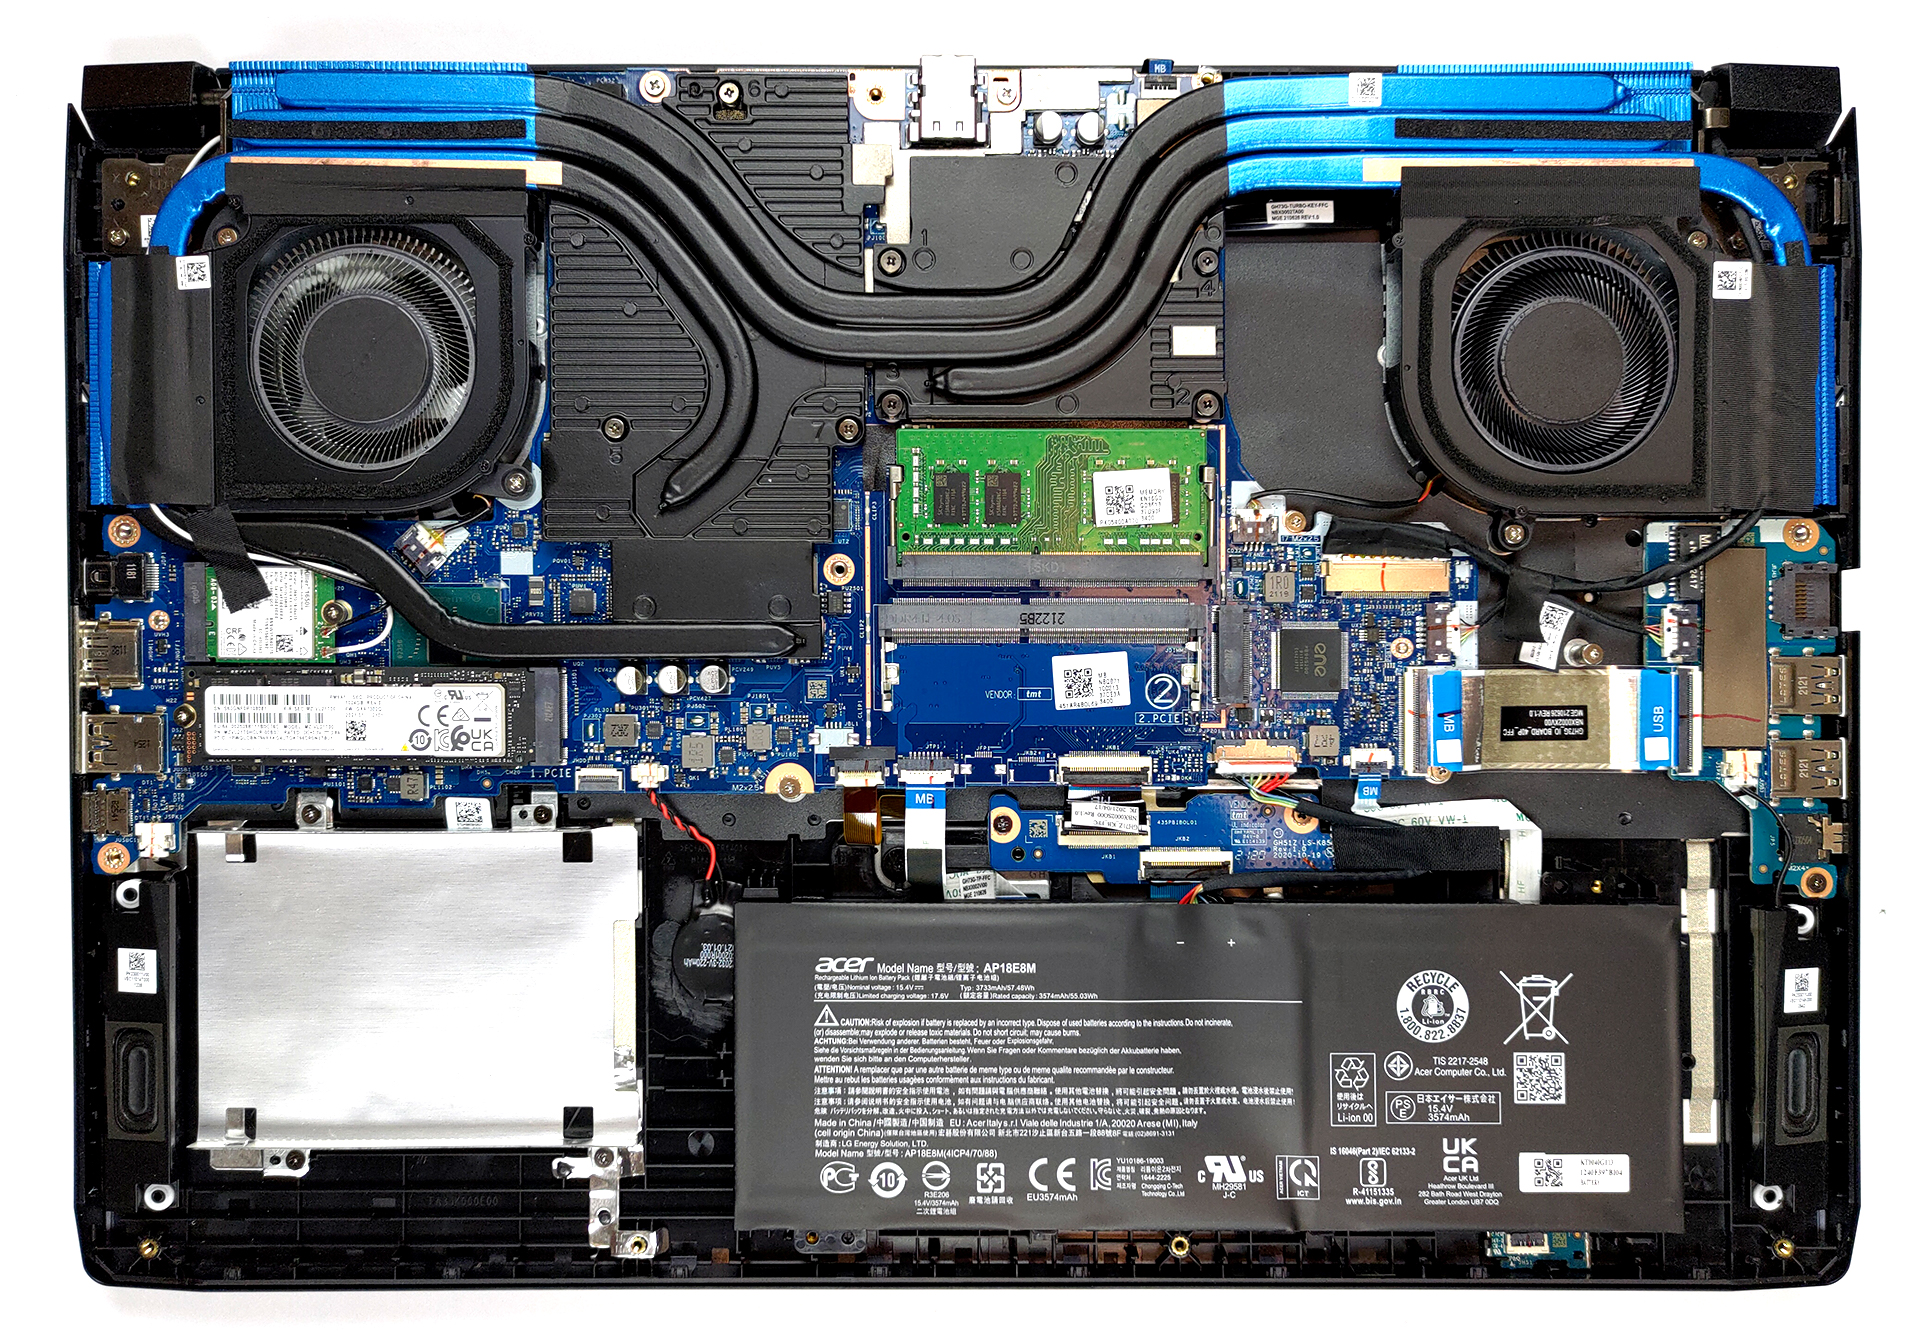 Inside Acer Helios 300 (PH317-55) - disassembly and upgrade options | LaptopMedia.com